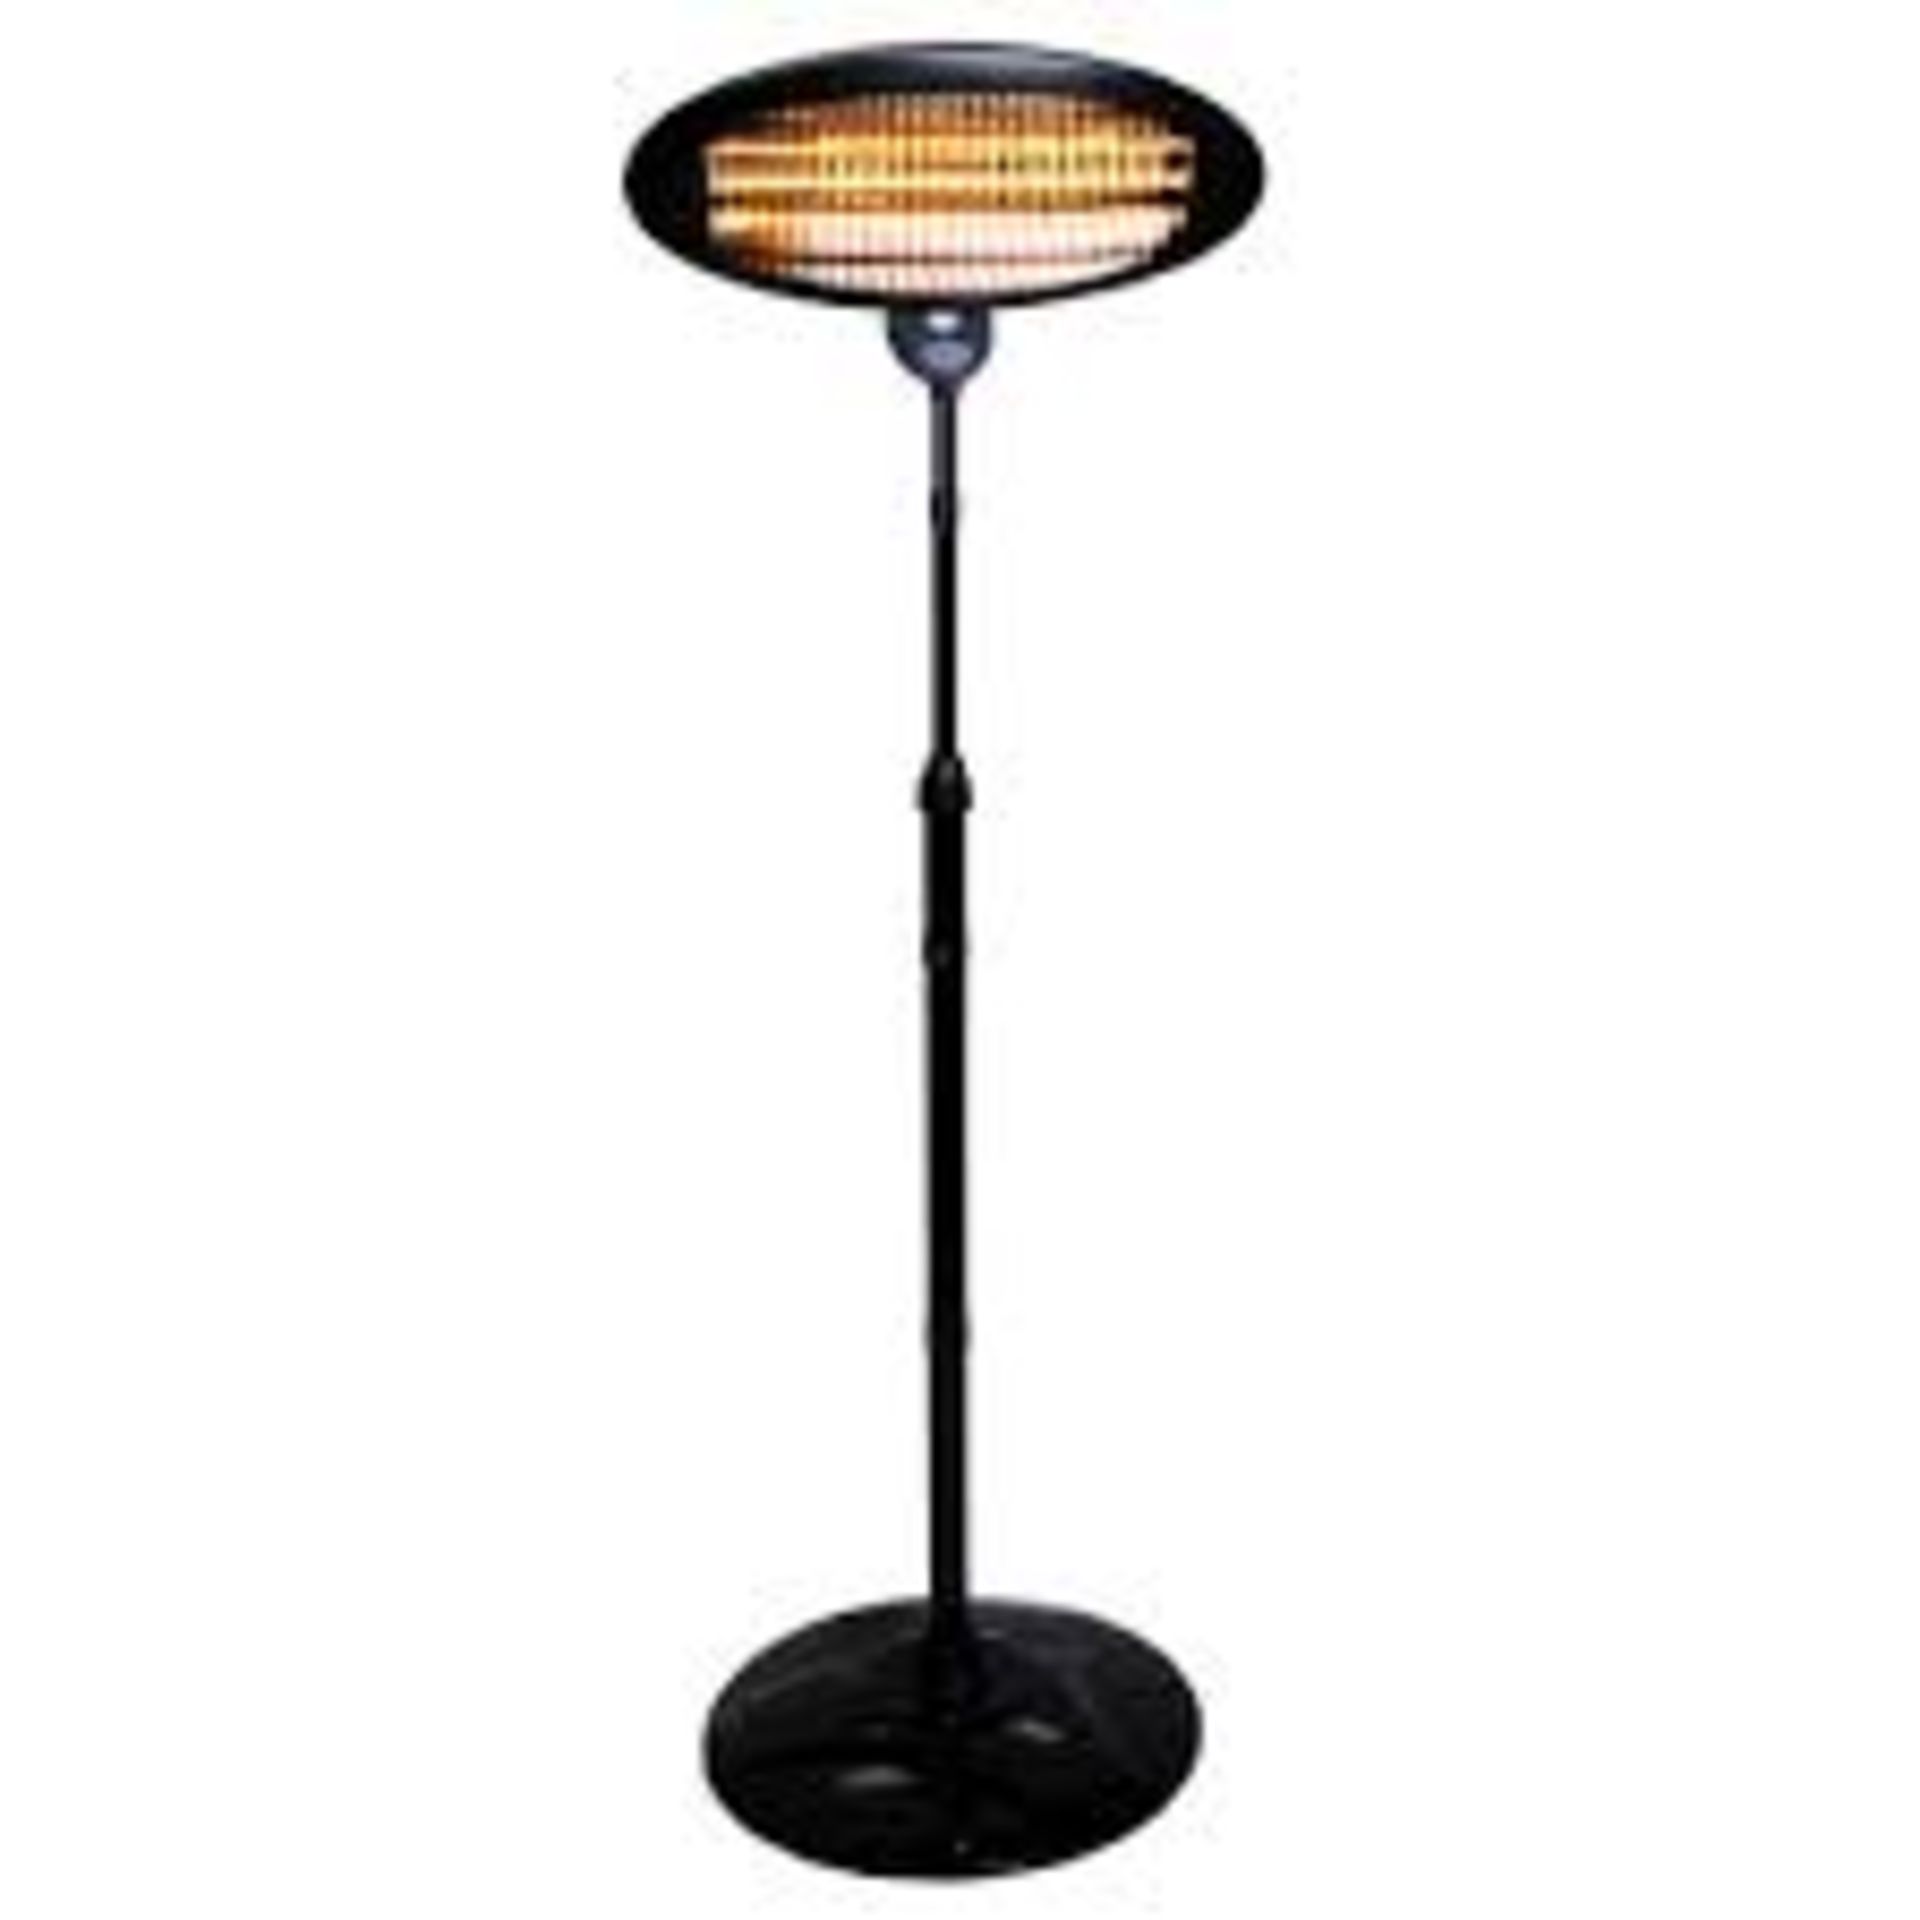 PALLET TO CONTAIN 10 X BRAND NEW ADJUSTABLE FREESTANDING OUTDOOR HALOGEN PATIO HEATER, ELECTRIC - Image 3 of 3